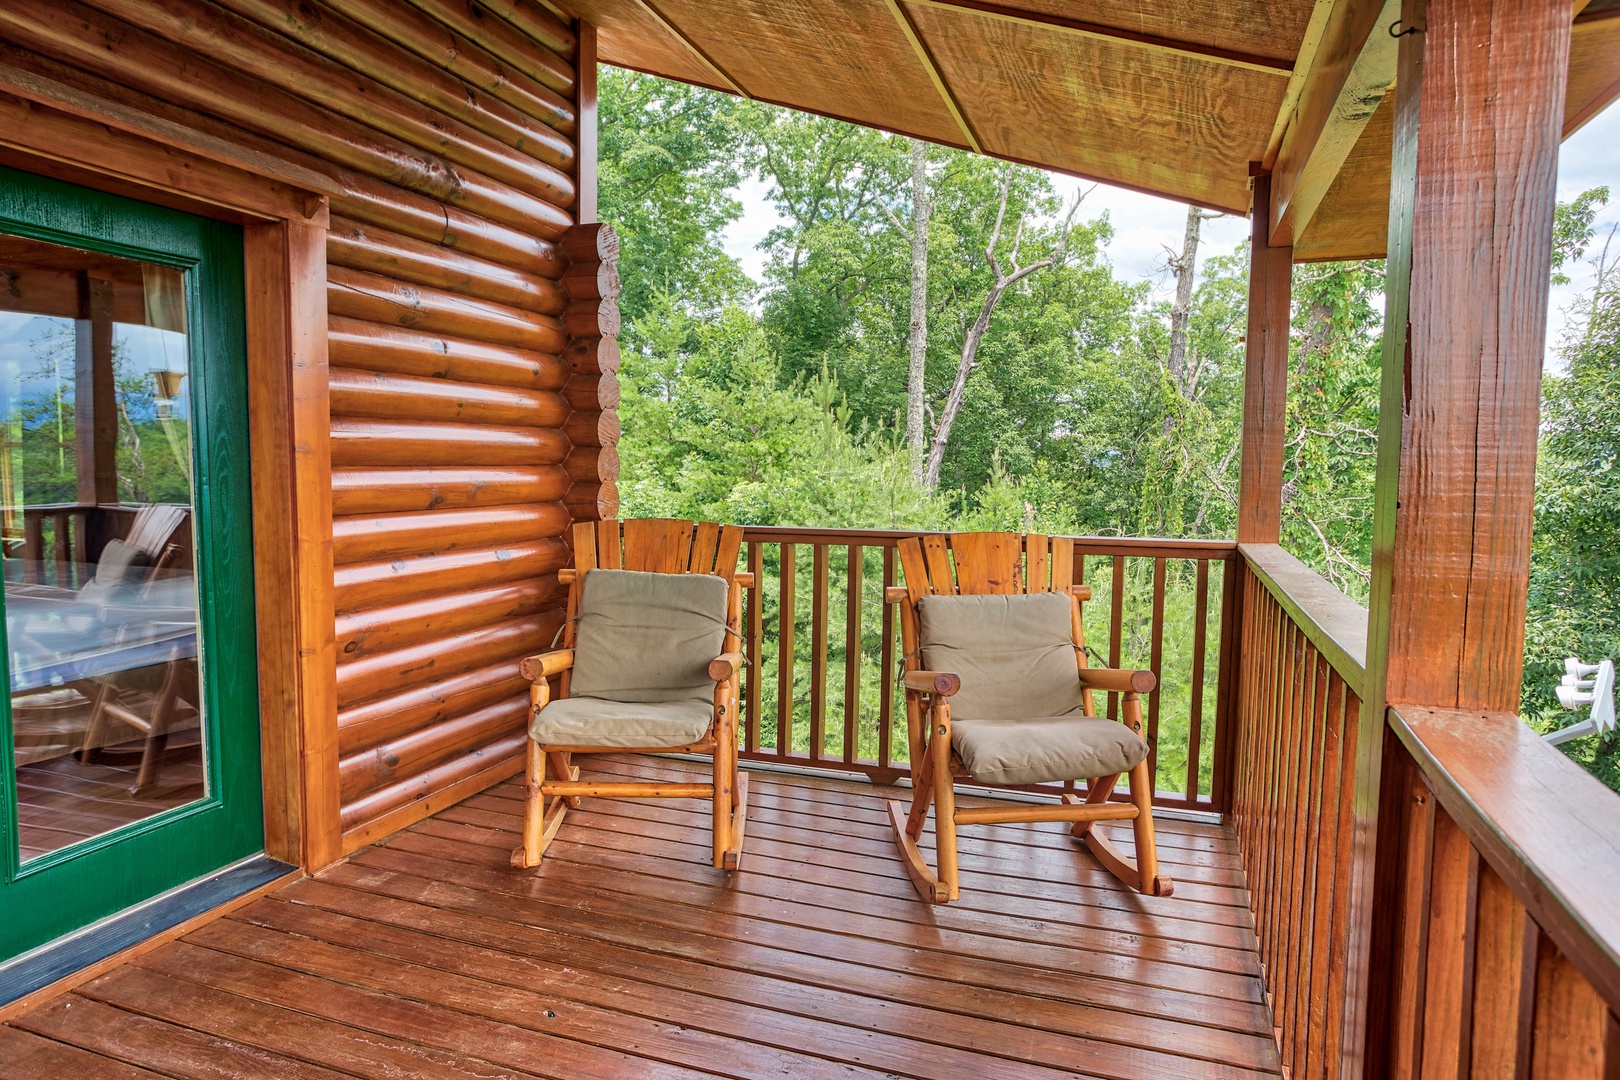 Rocking chairs on the covered deck at I Do Love Views, a 3 bedroom cabin rental located in Pigeon Forge